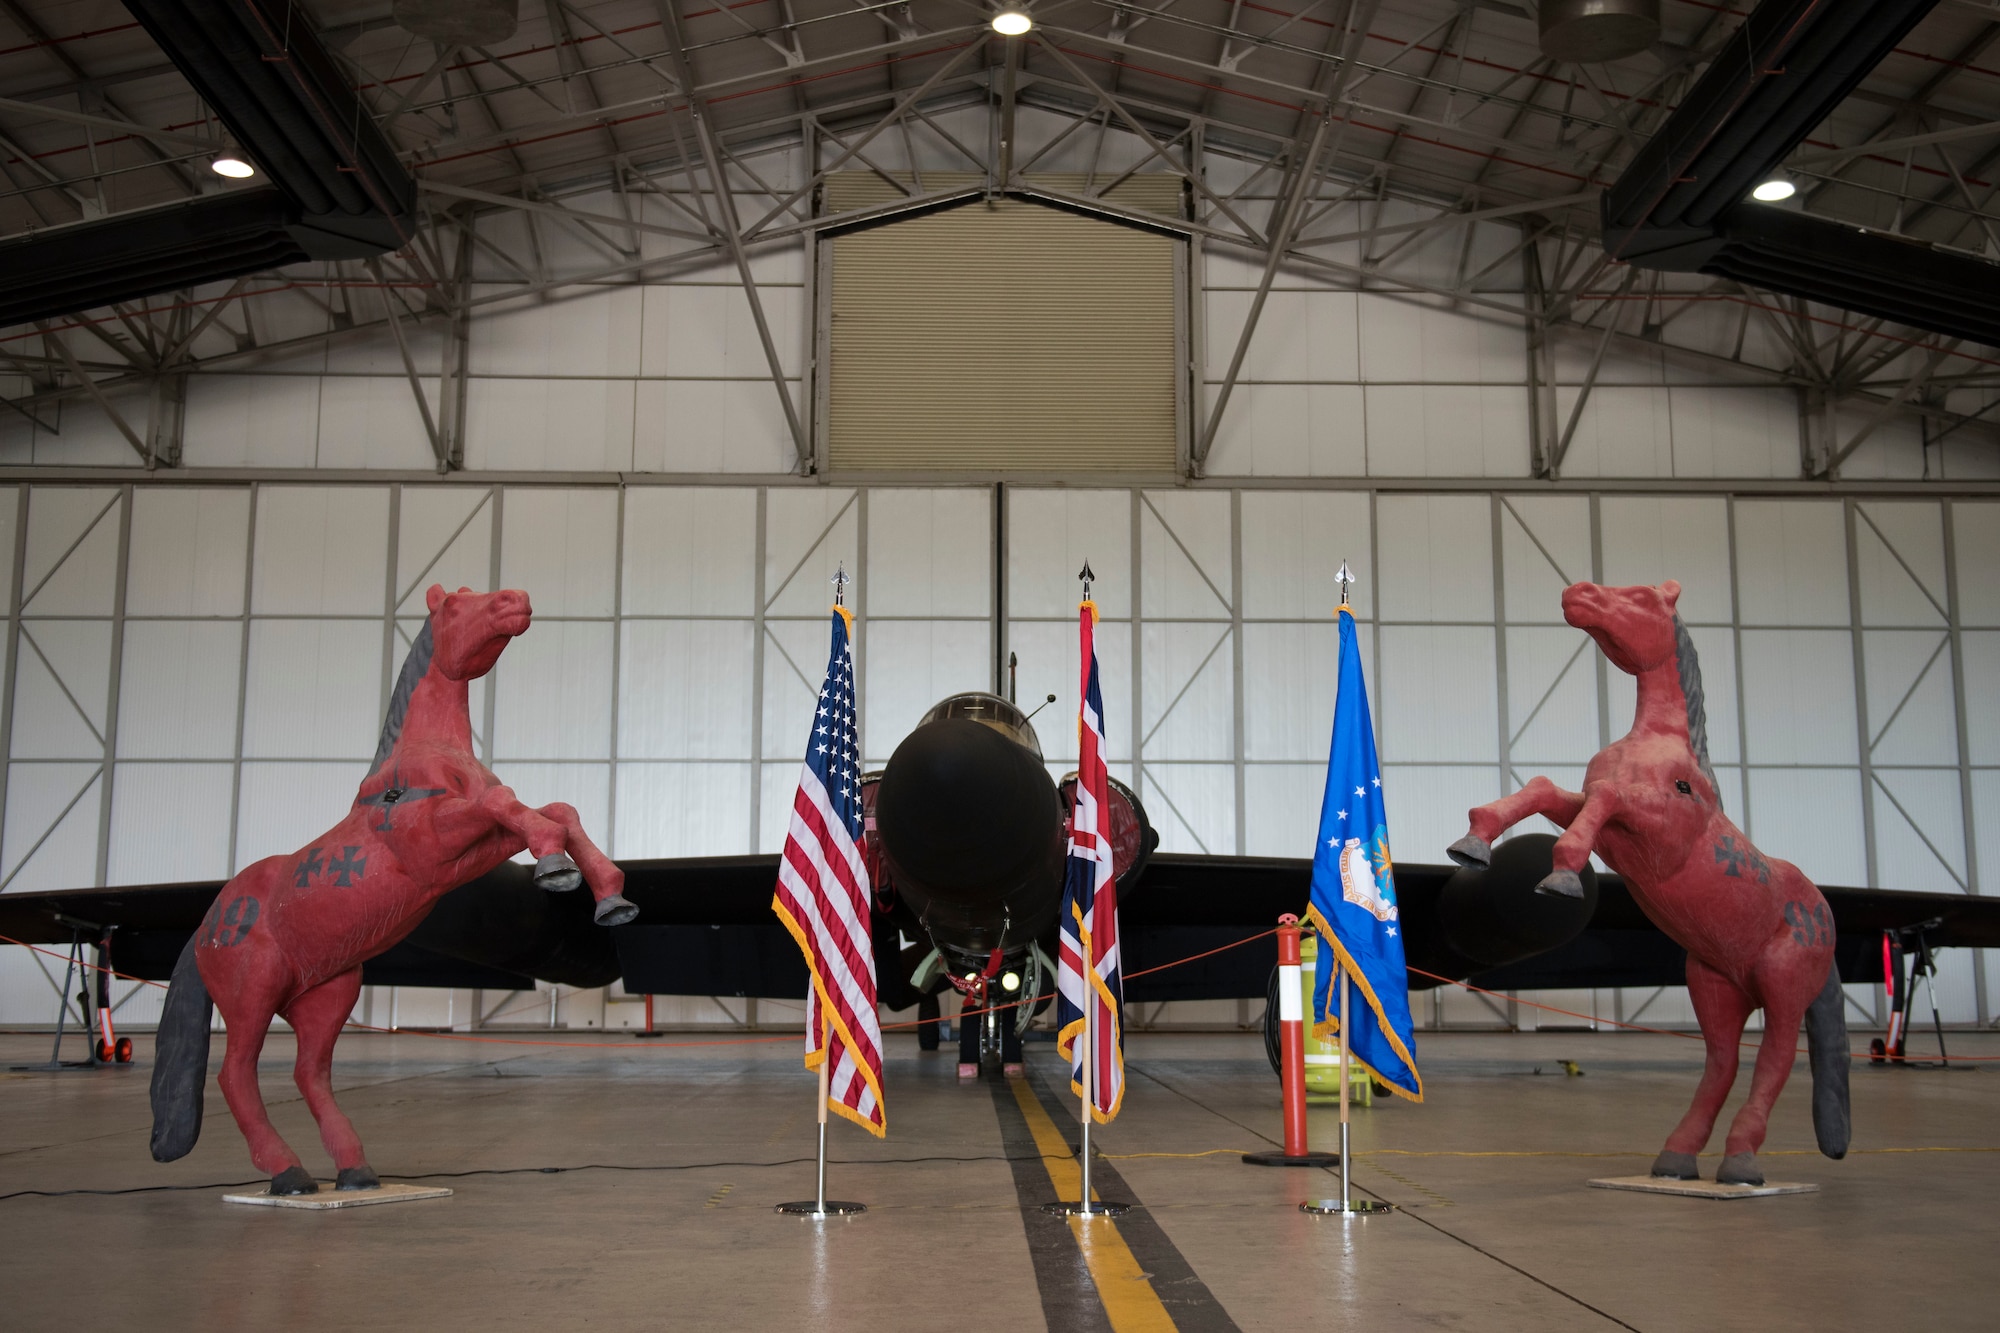 A U-2 Lockheed aircraft stands on display during the 99th Expeditionary Reconnaissance Squadron change of command ceremony, at RAF Fairford, England, June 24, 2020. The change of command ceremony is a military tradition that represents a formal transfer of a unit’s authority and responsibility from one commander to another. (U.S. Air Force photo by Airman 1st Class Jennifer Zima)